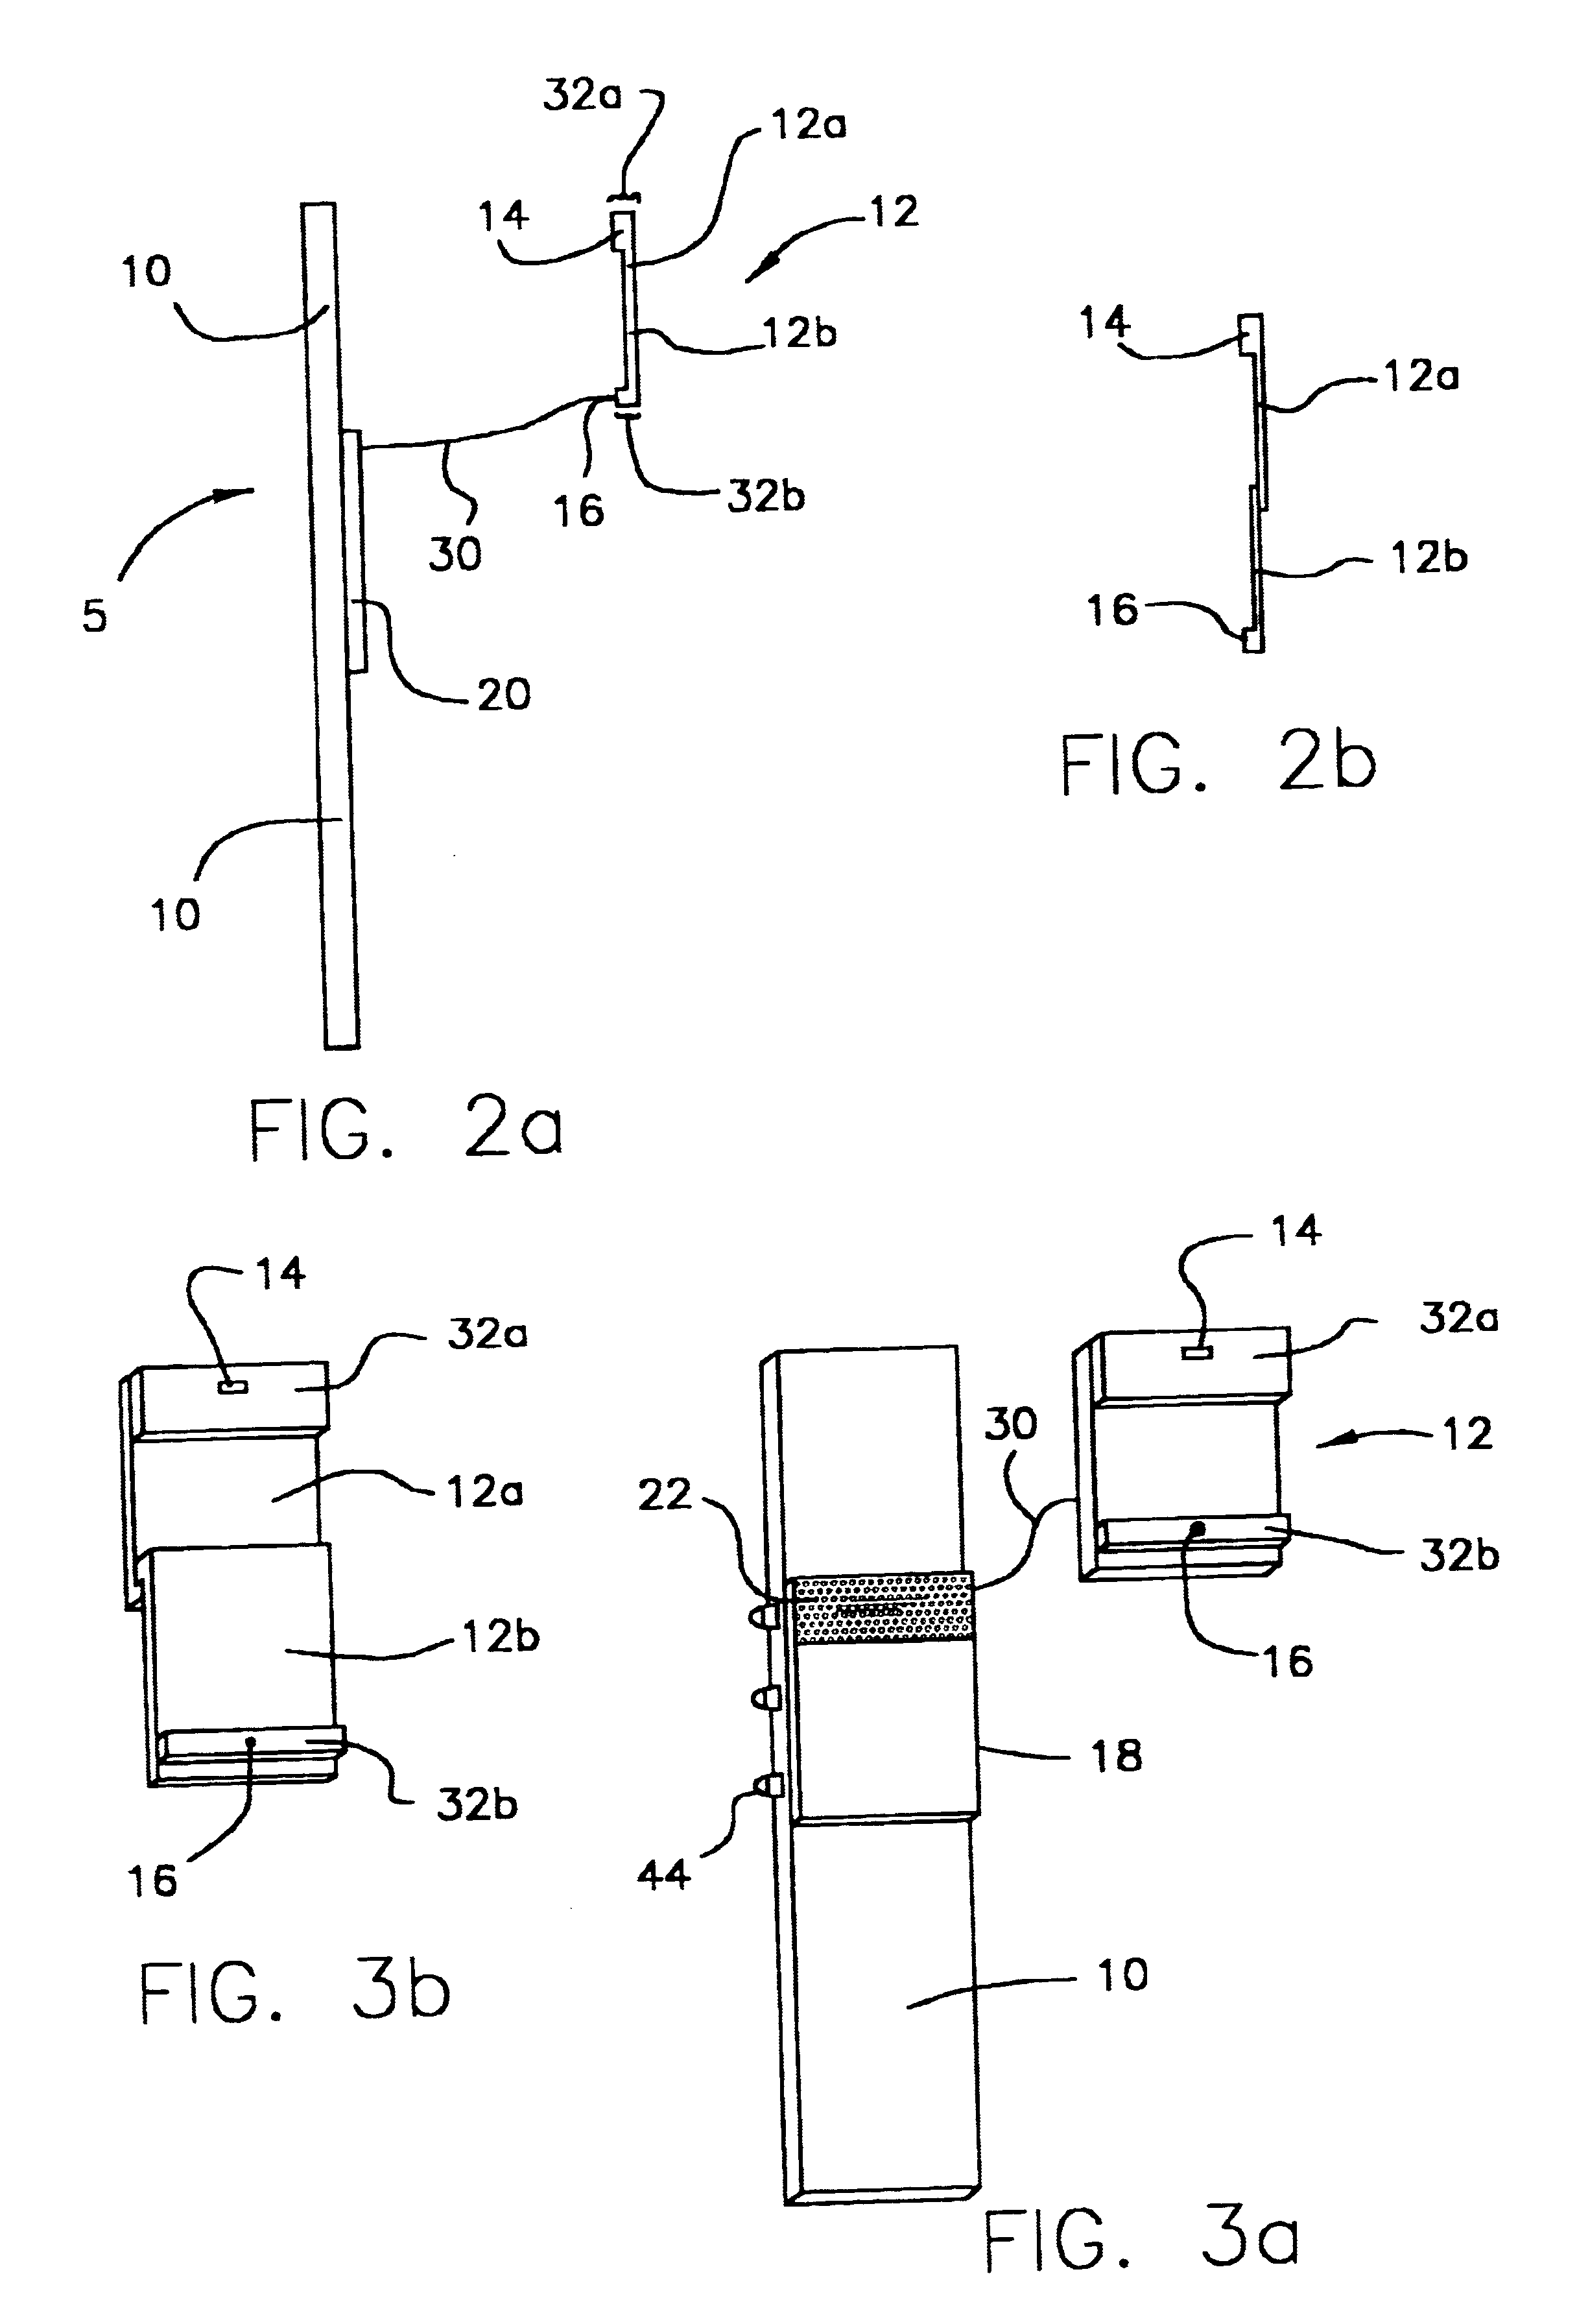 Antenna system for a wrist communication device